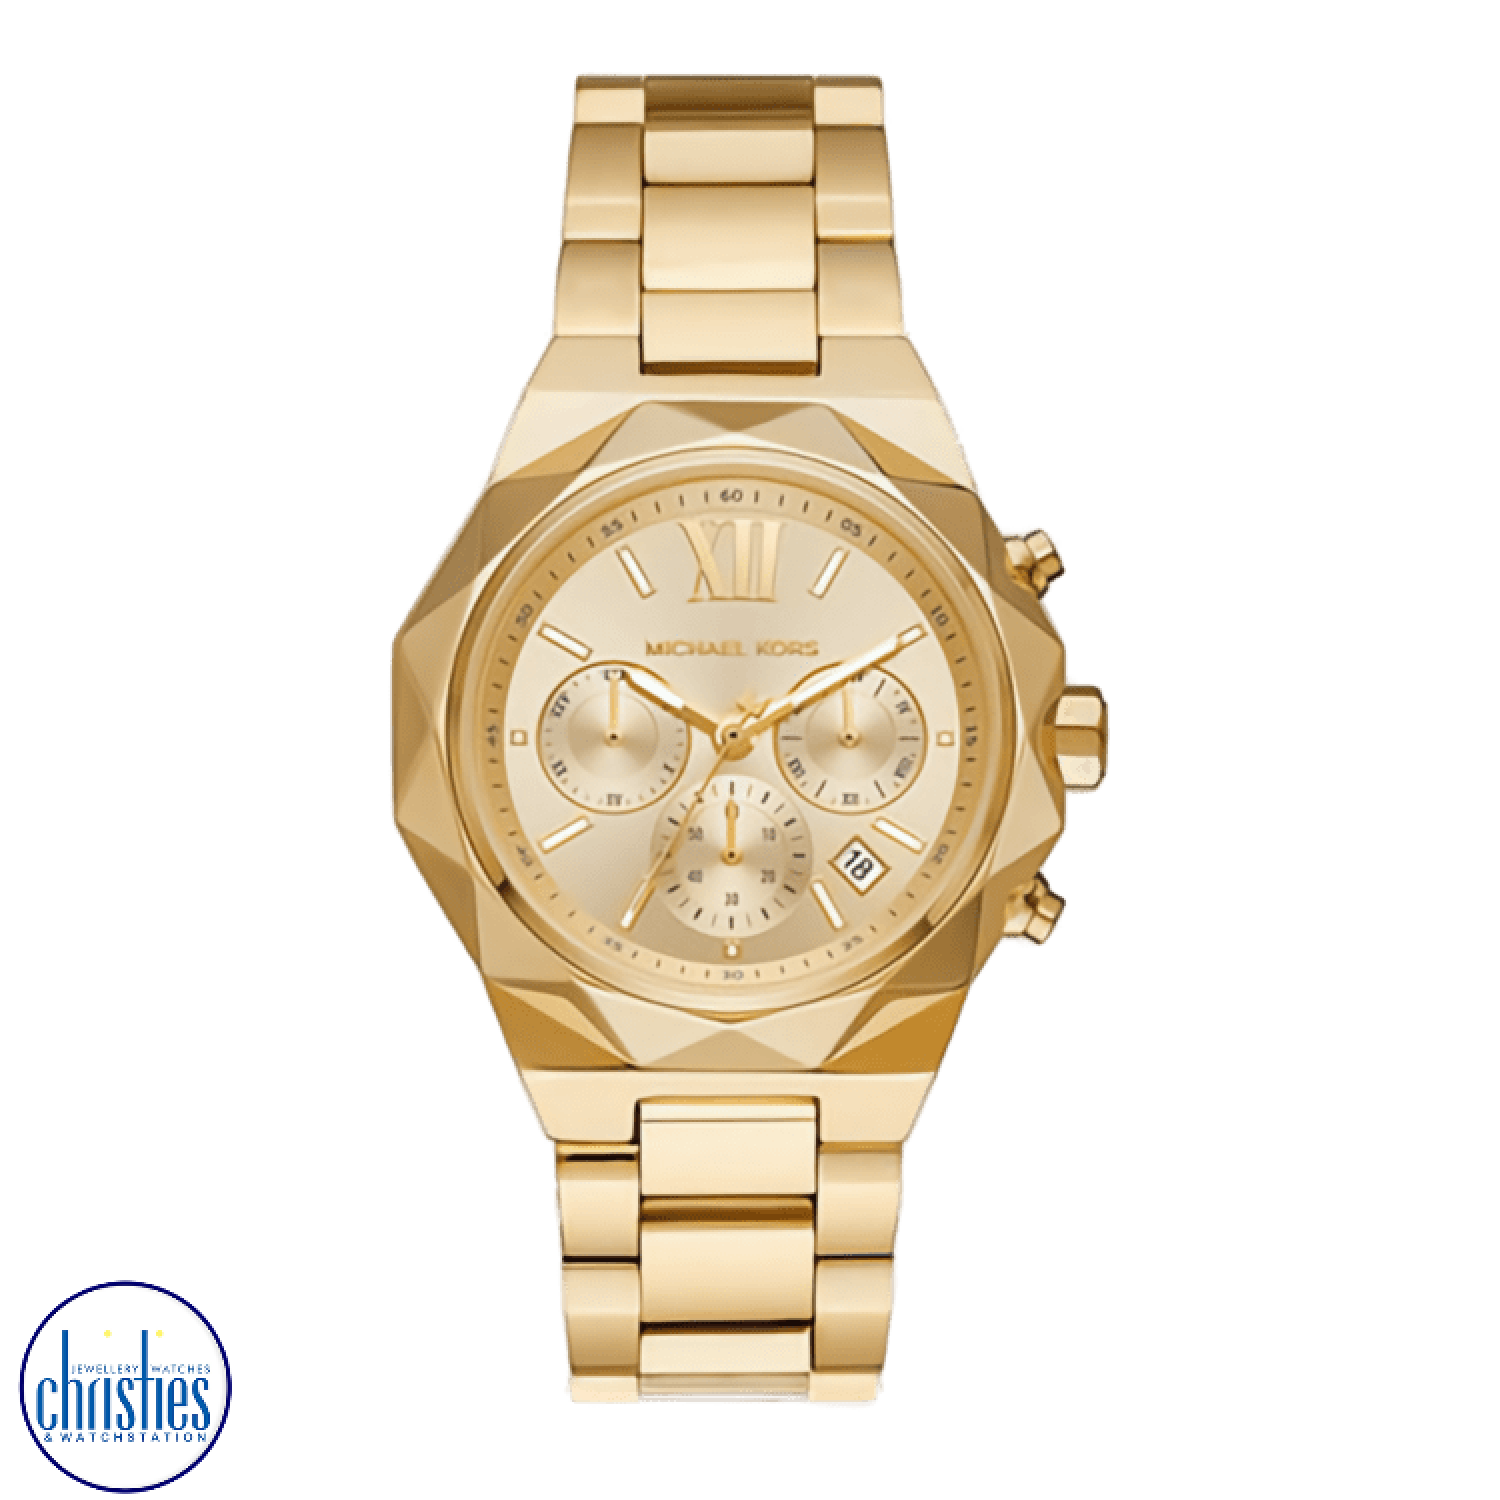 MK4690 Michael Kors Raquel Chronograph Gold Tone Watch. The Raquel MK4690 is a stunning timepiece that combines functionality with sophisticated style.